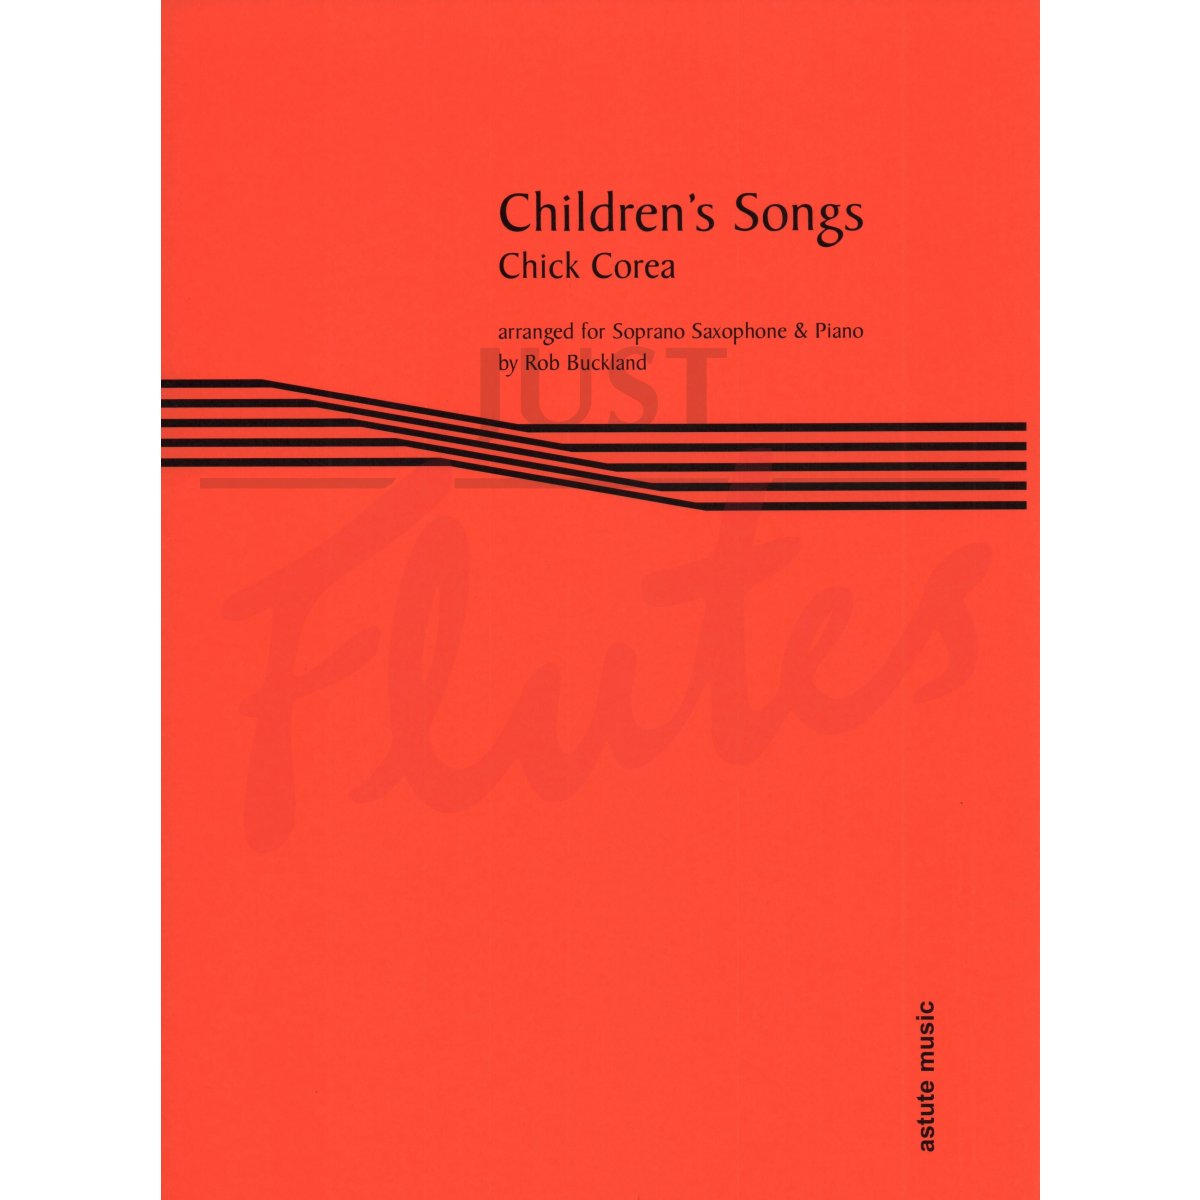 Children's Songs for Soprano Saxophone and Piano